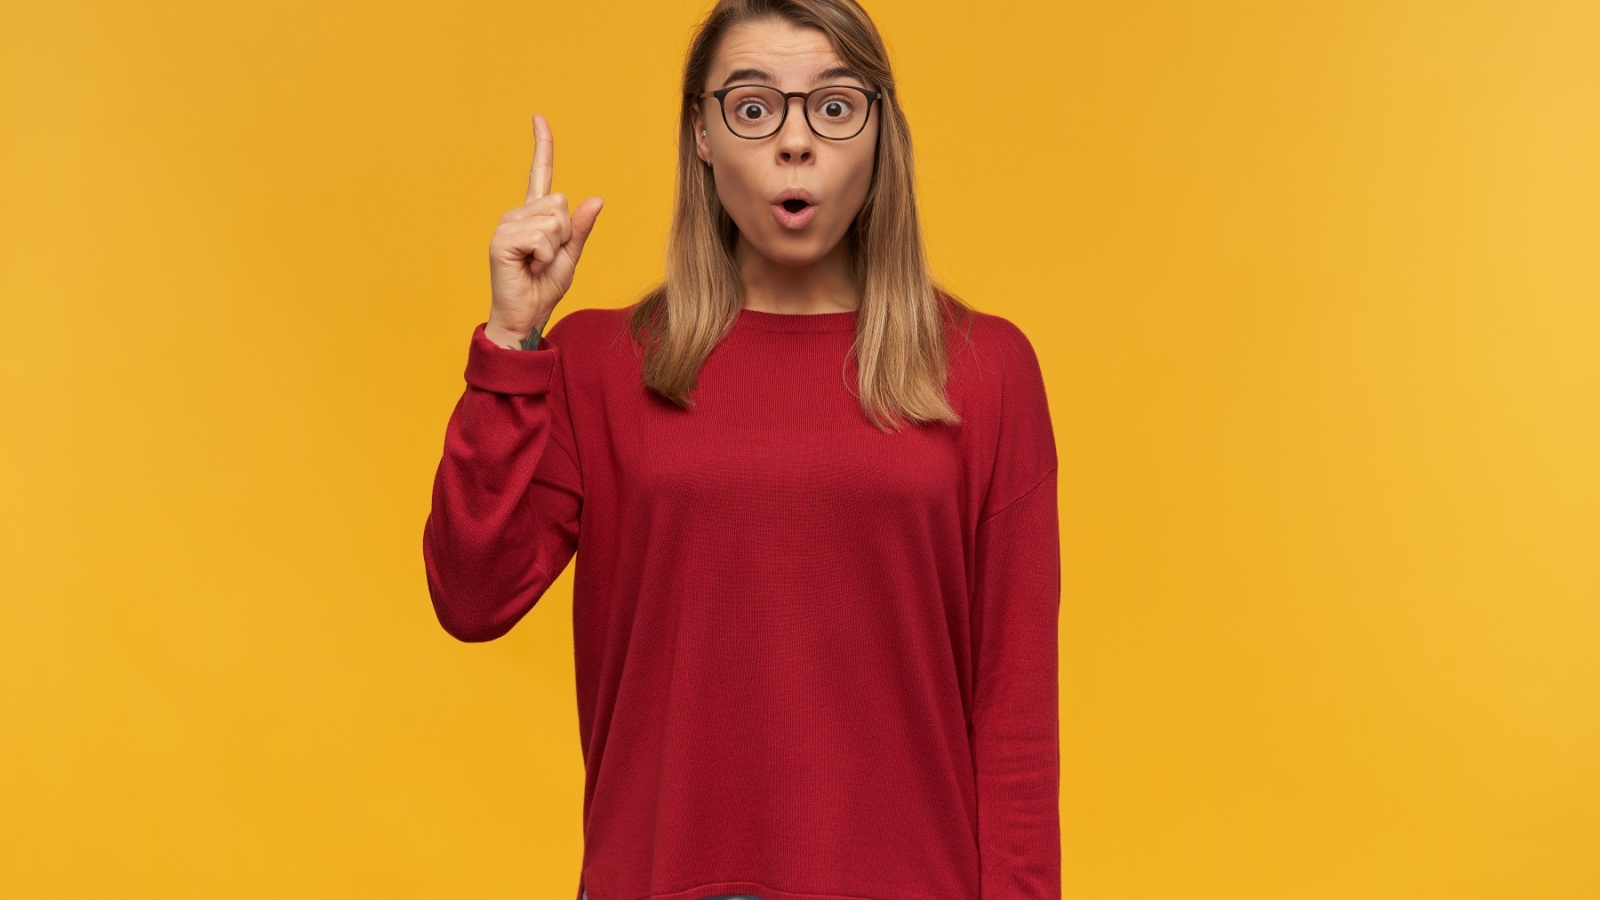 Young girl looking inspired, with rounded mouth, has blond hair. Wearing glasses. Pointing up with index finger on left hand like having a great idea. Looking camera isolated over yellow background